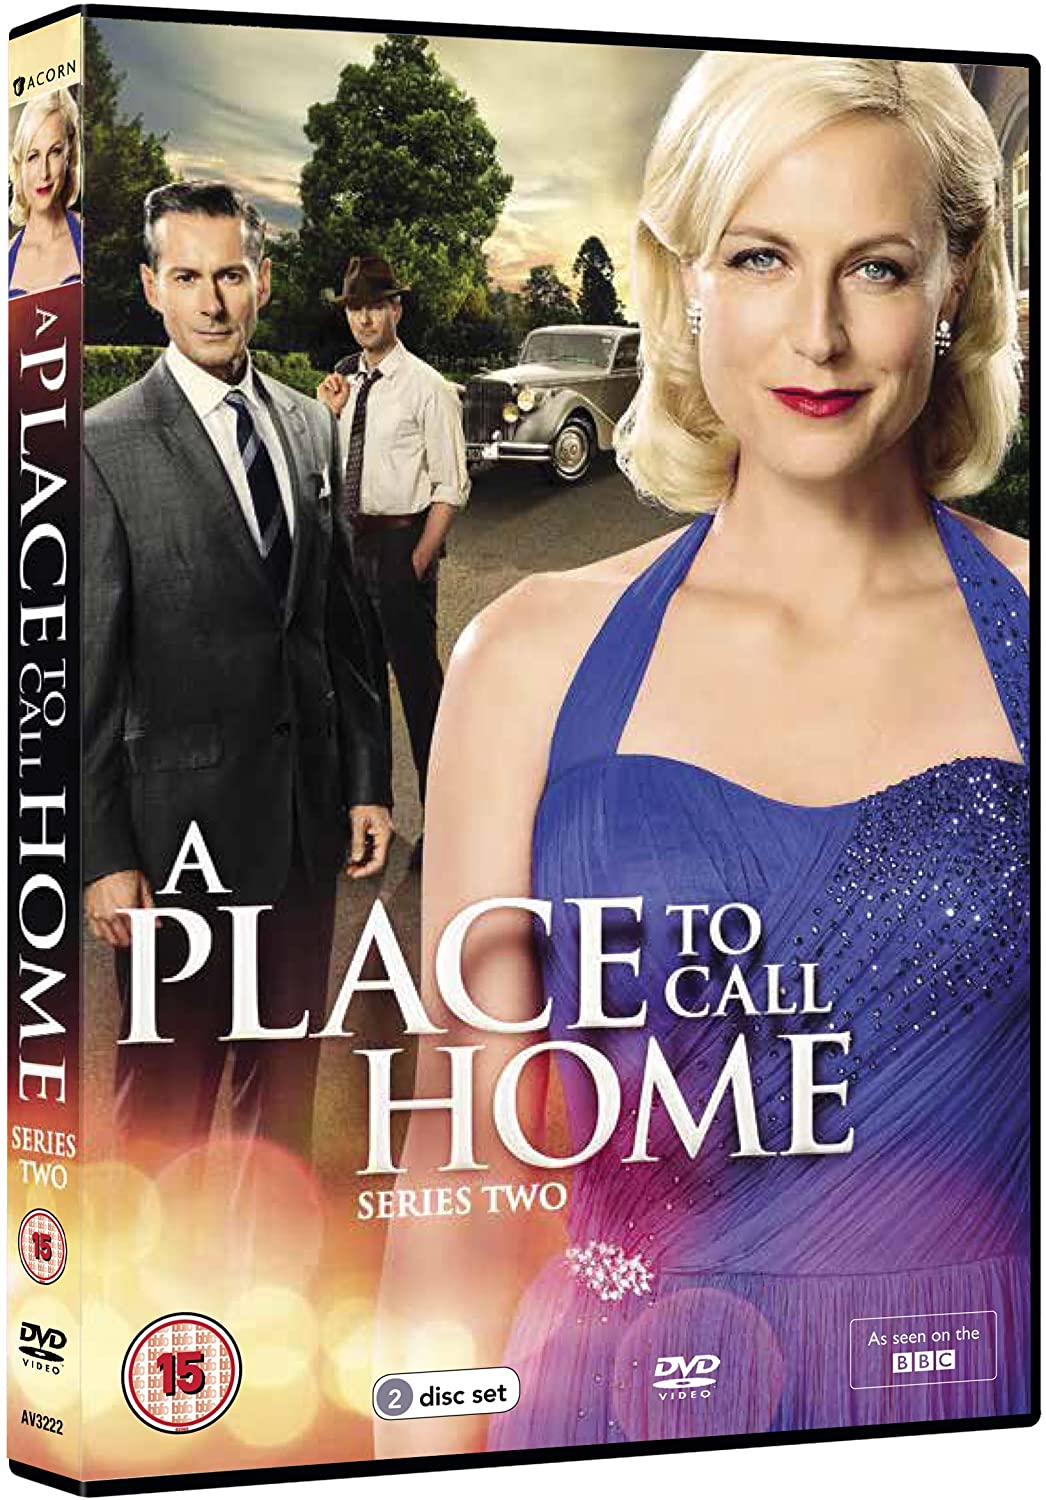 A Place to Call Home Series Two - [DVD]